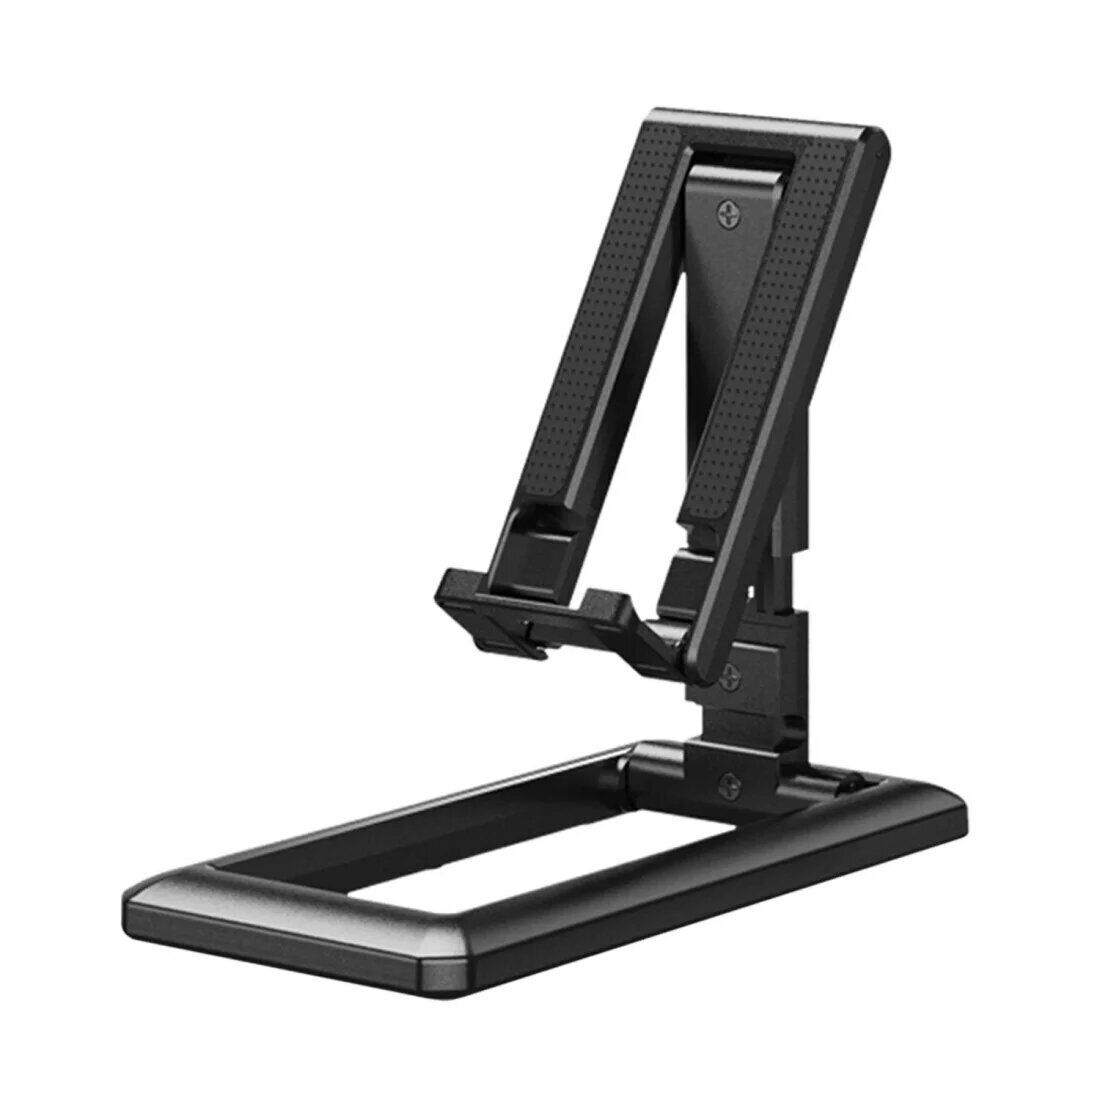 MOBILE PHONE HOLDER STAND DESKTOP TABLE DESK MOUNT FOR IPHONE IPAD PORTABLE